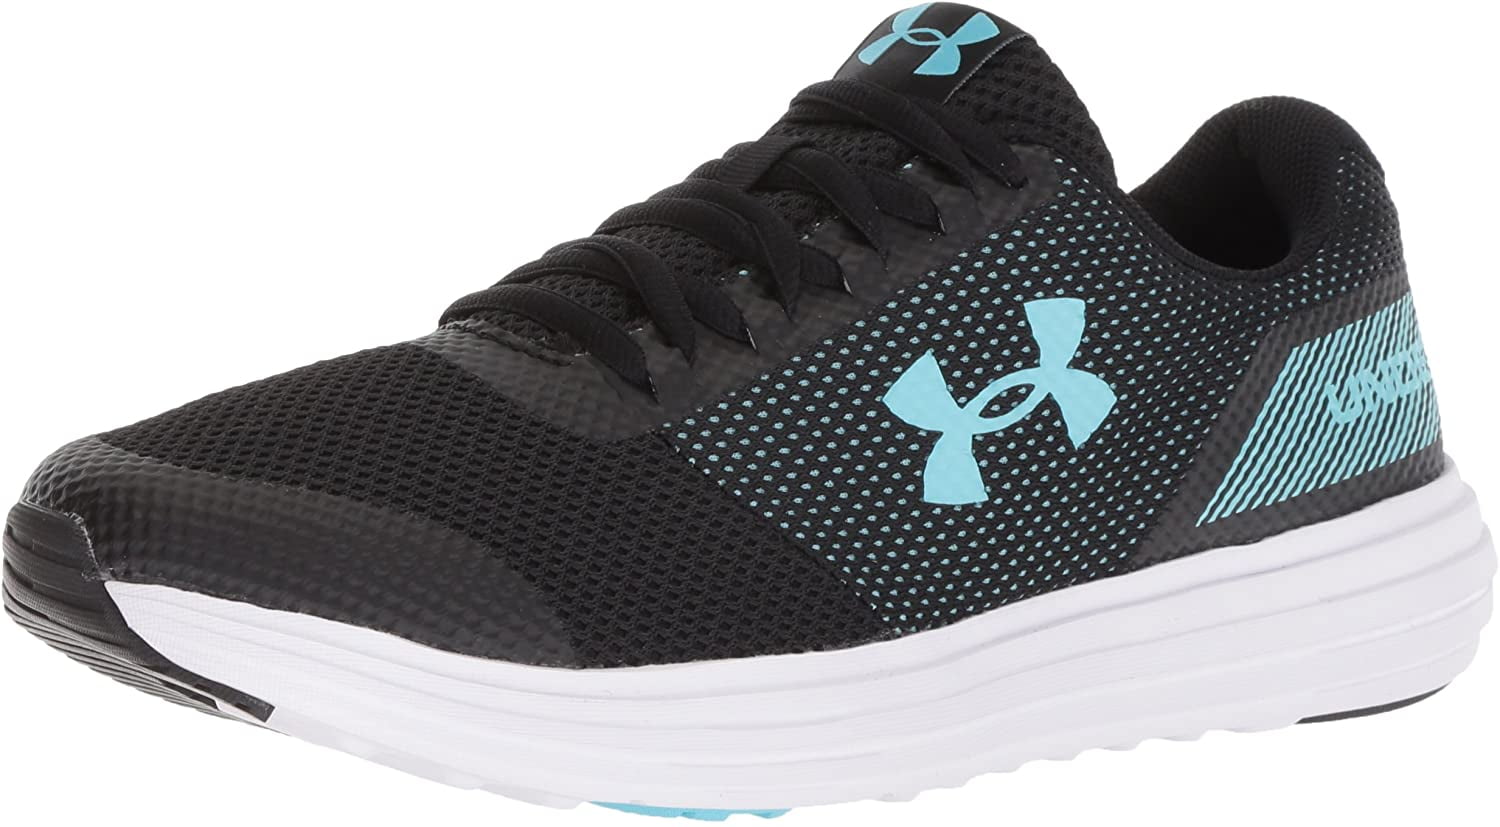 under armour women's surge running shoes